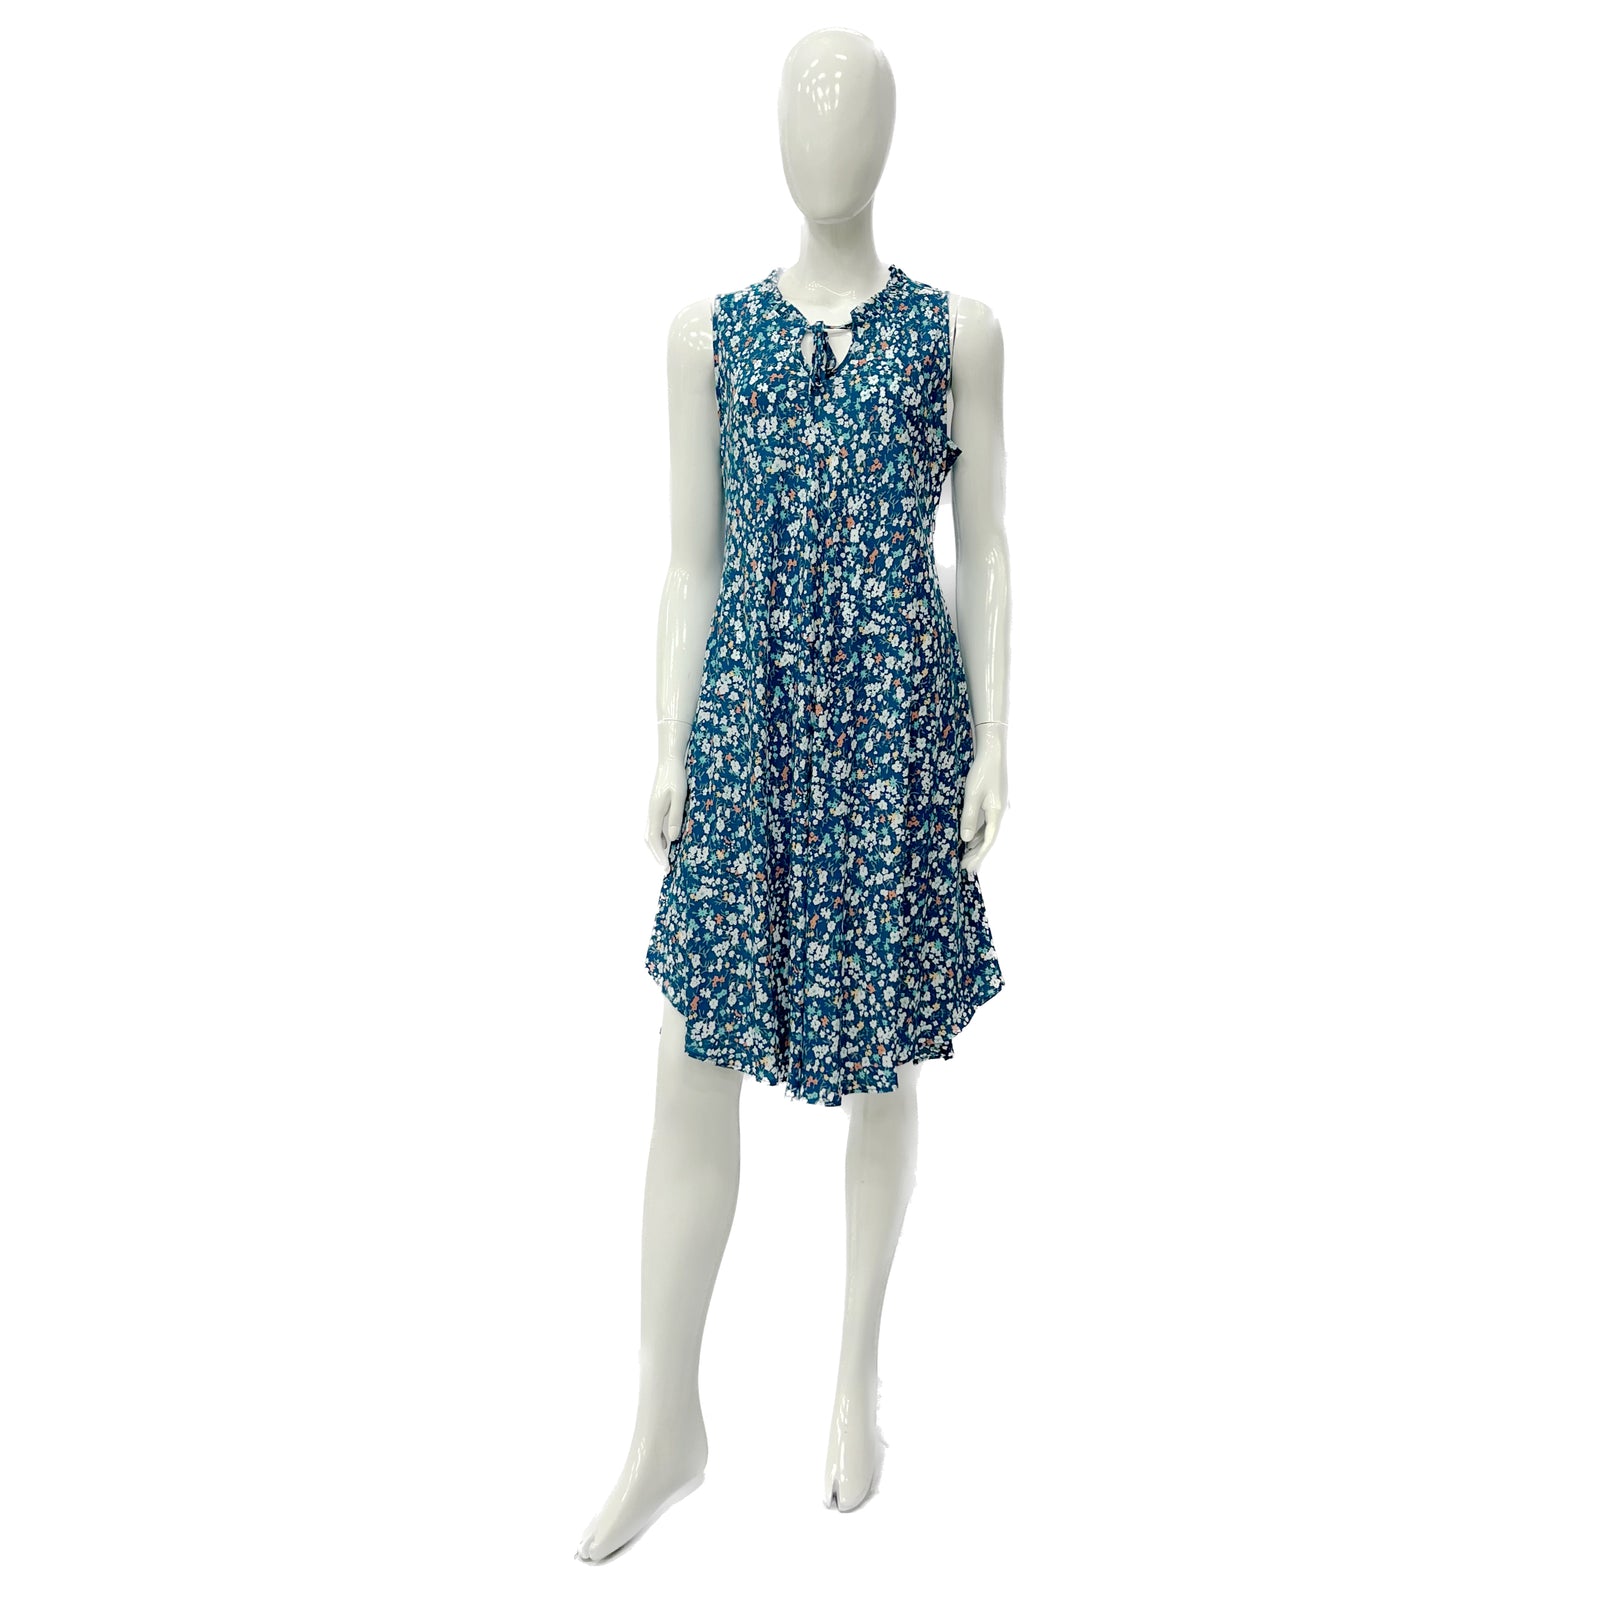 Wholesale Women's Dresses Rayon Tie-Neck Dress-Floral 6-72-Case S-XL Marilyn NW36